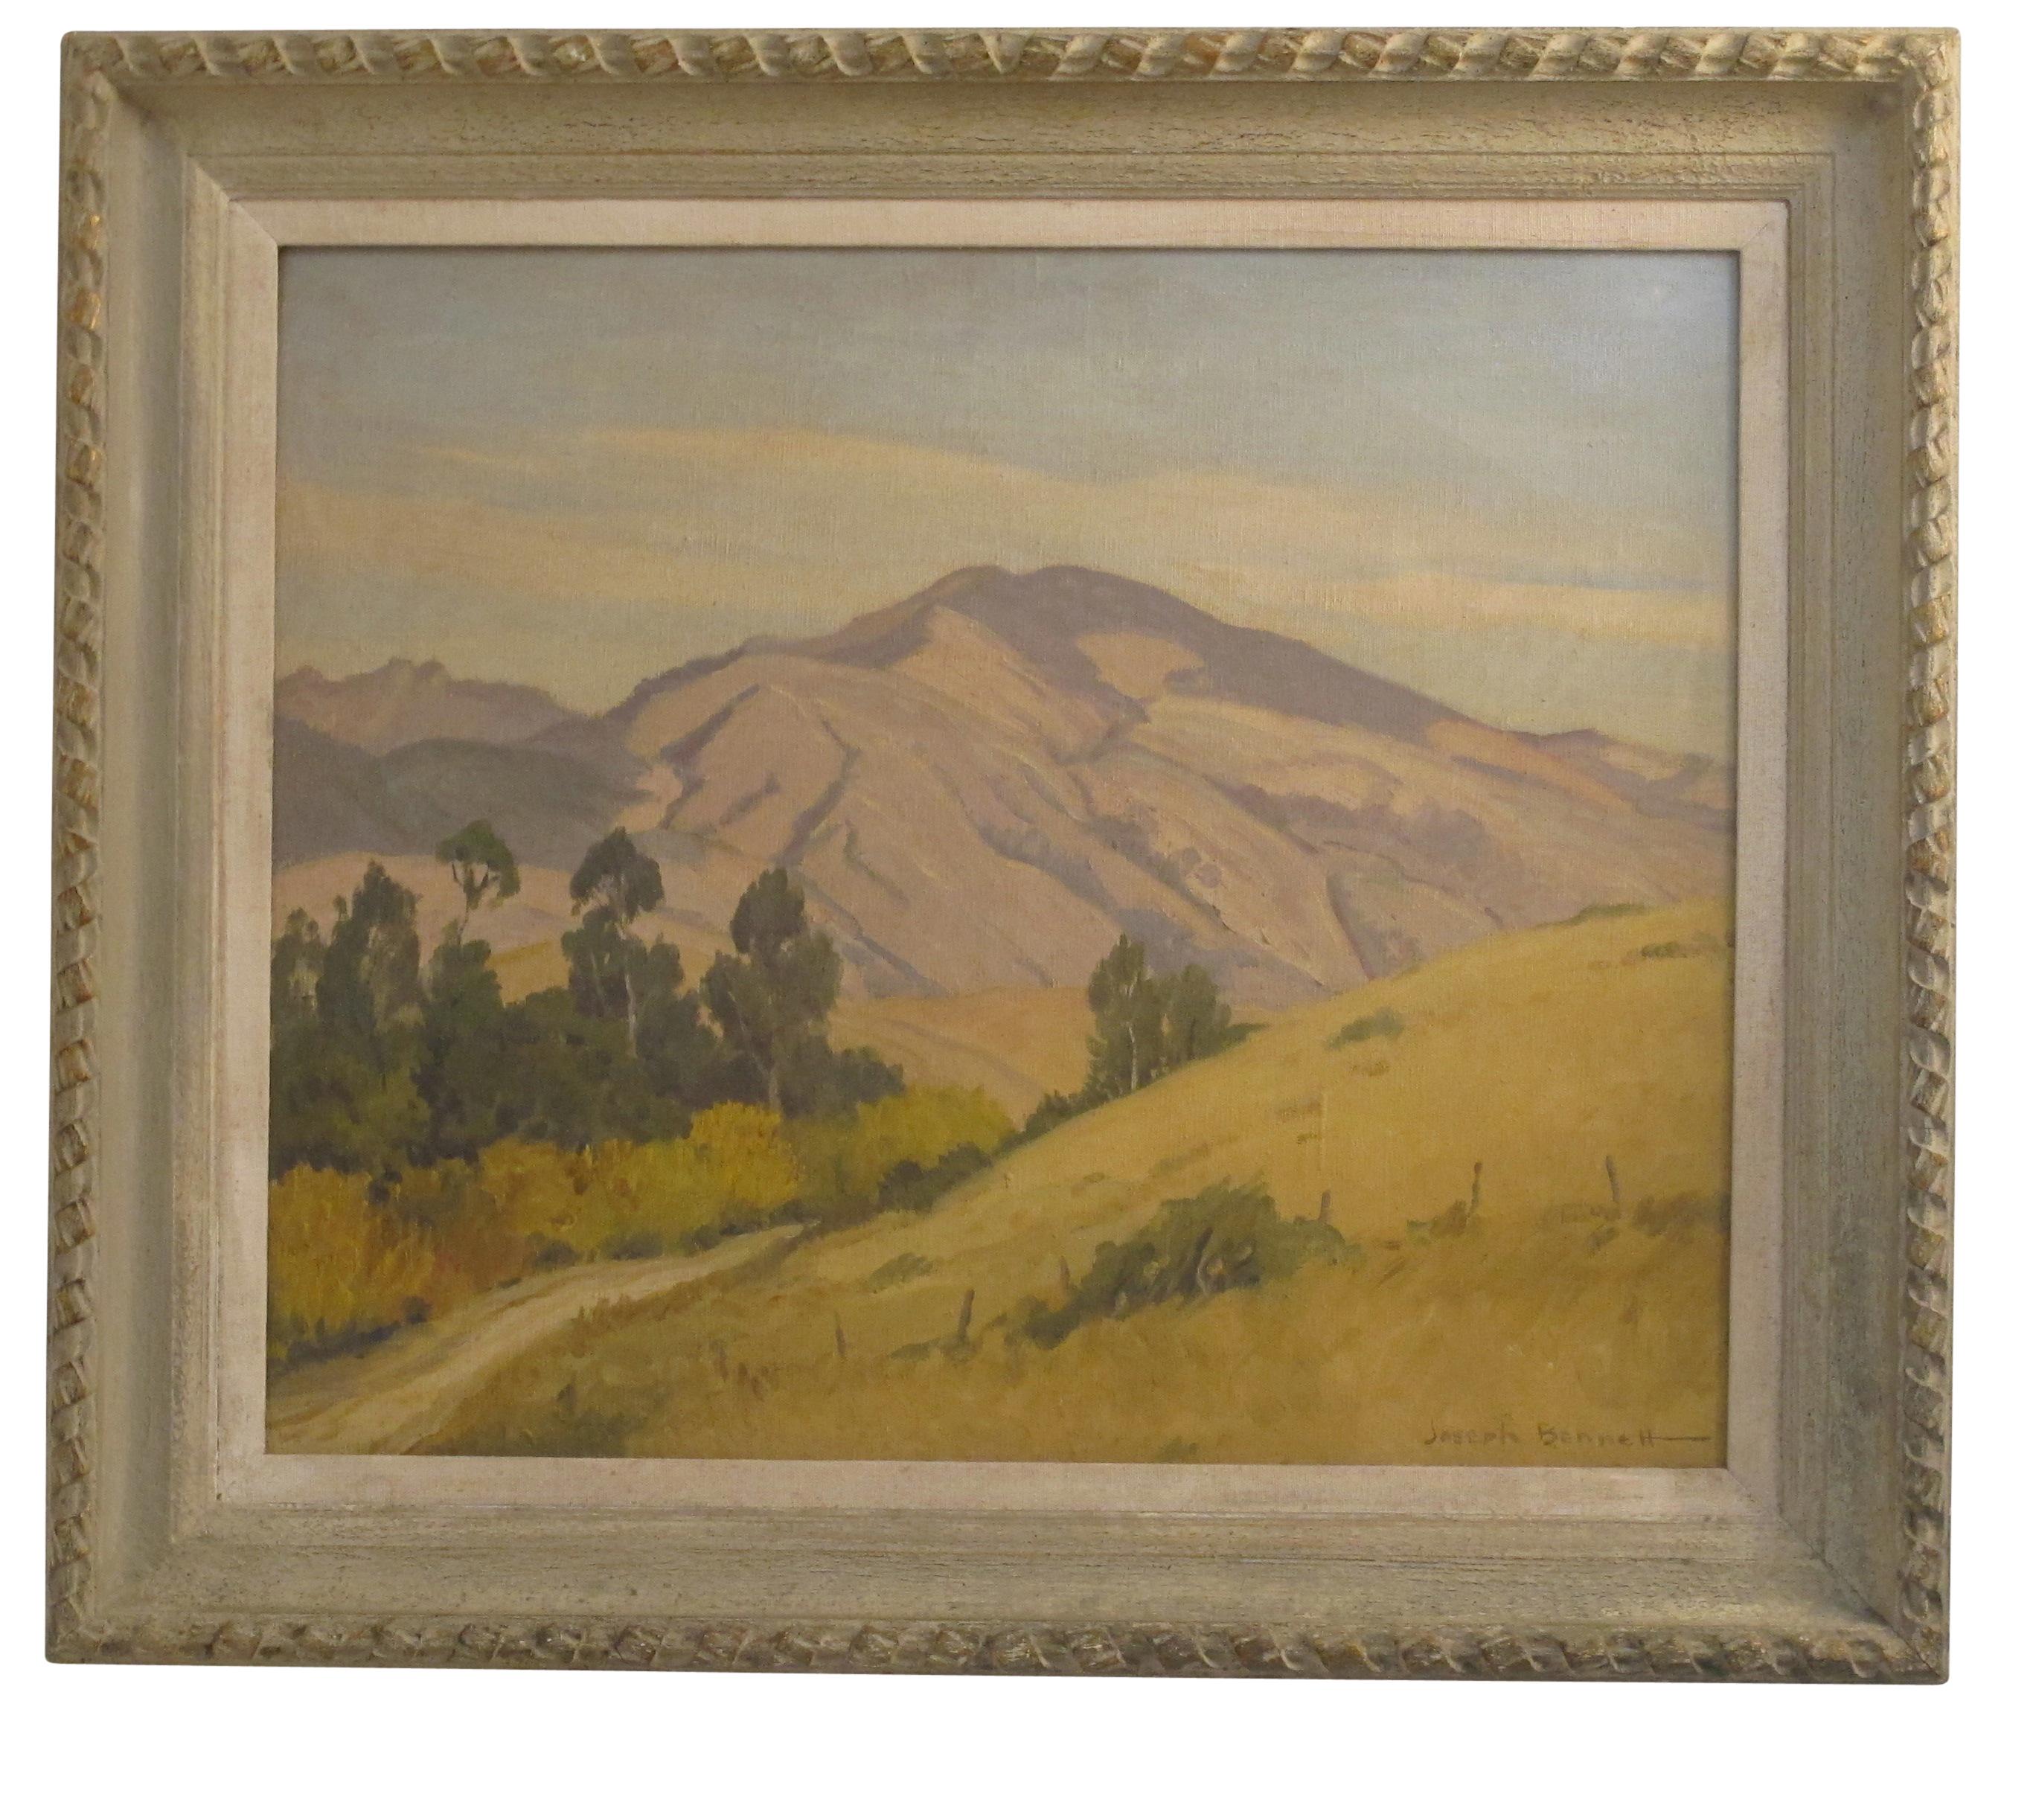 California landscape painting signed Joseph Bennett. Oil on canvas in carved and painted wood frame.
Joseph Hastings Bennett (b.1889 - d.1969) was a painter, etcher, and printmaker. He was born in San Diego, California on March 27, 1889. In his